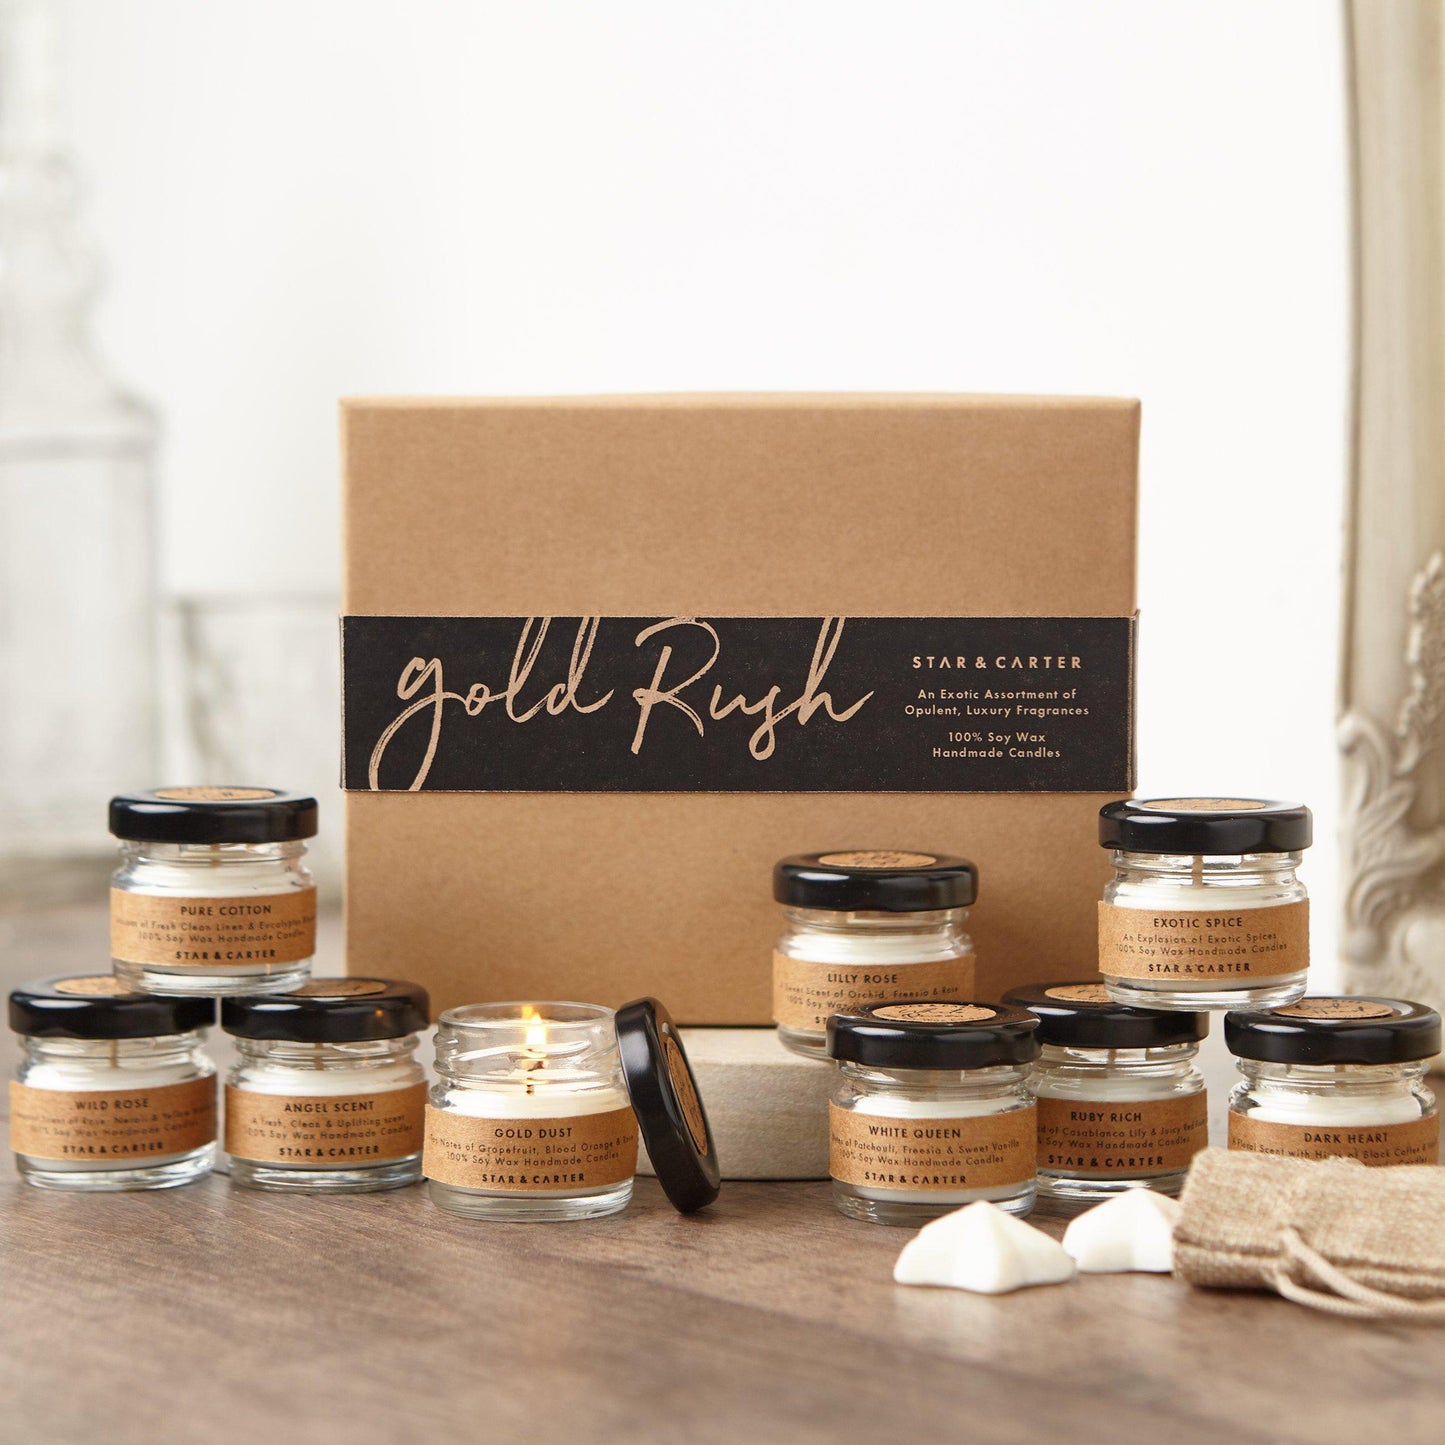 Gold Rush Gift Set-Star & Carter Soy Wax Candles